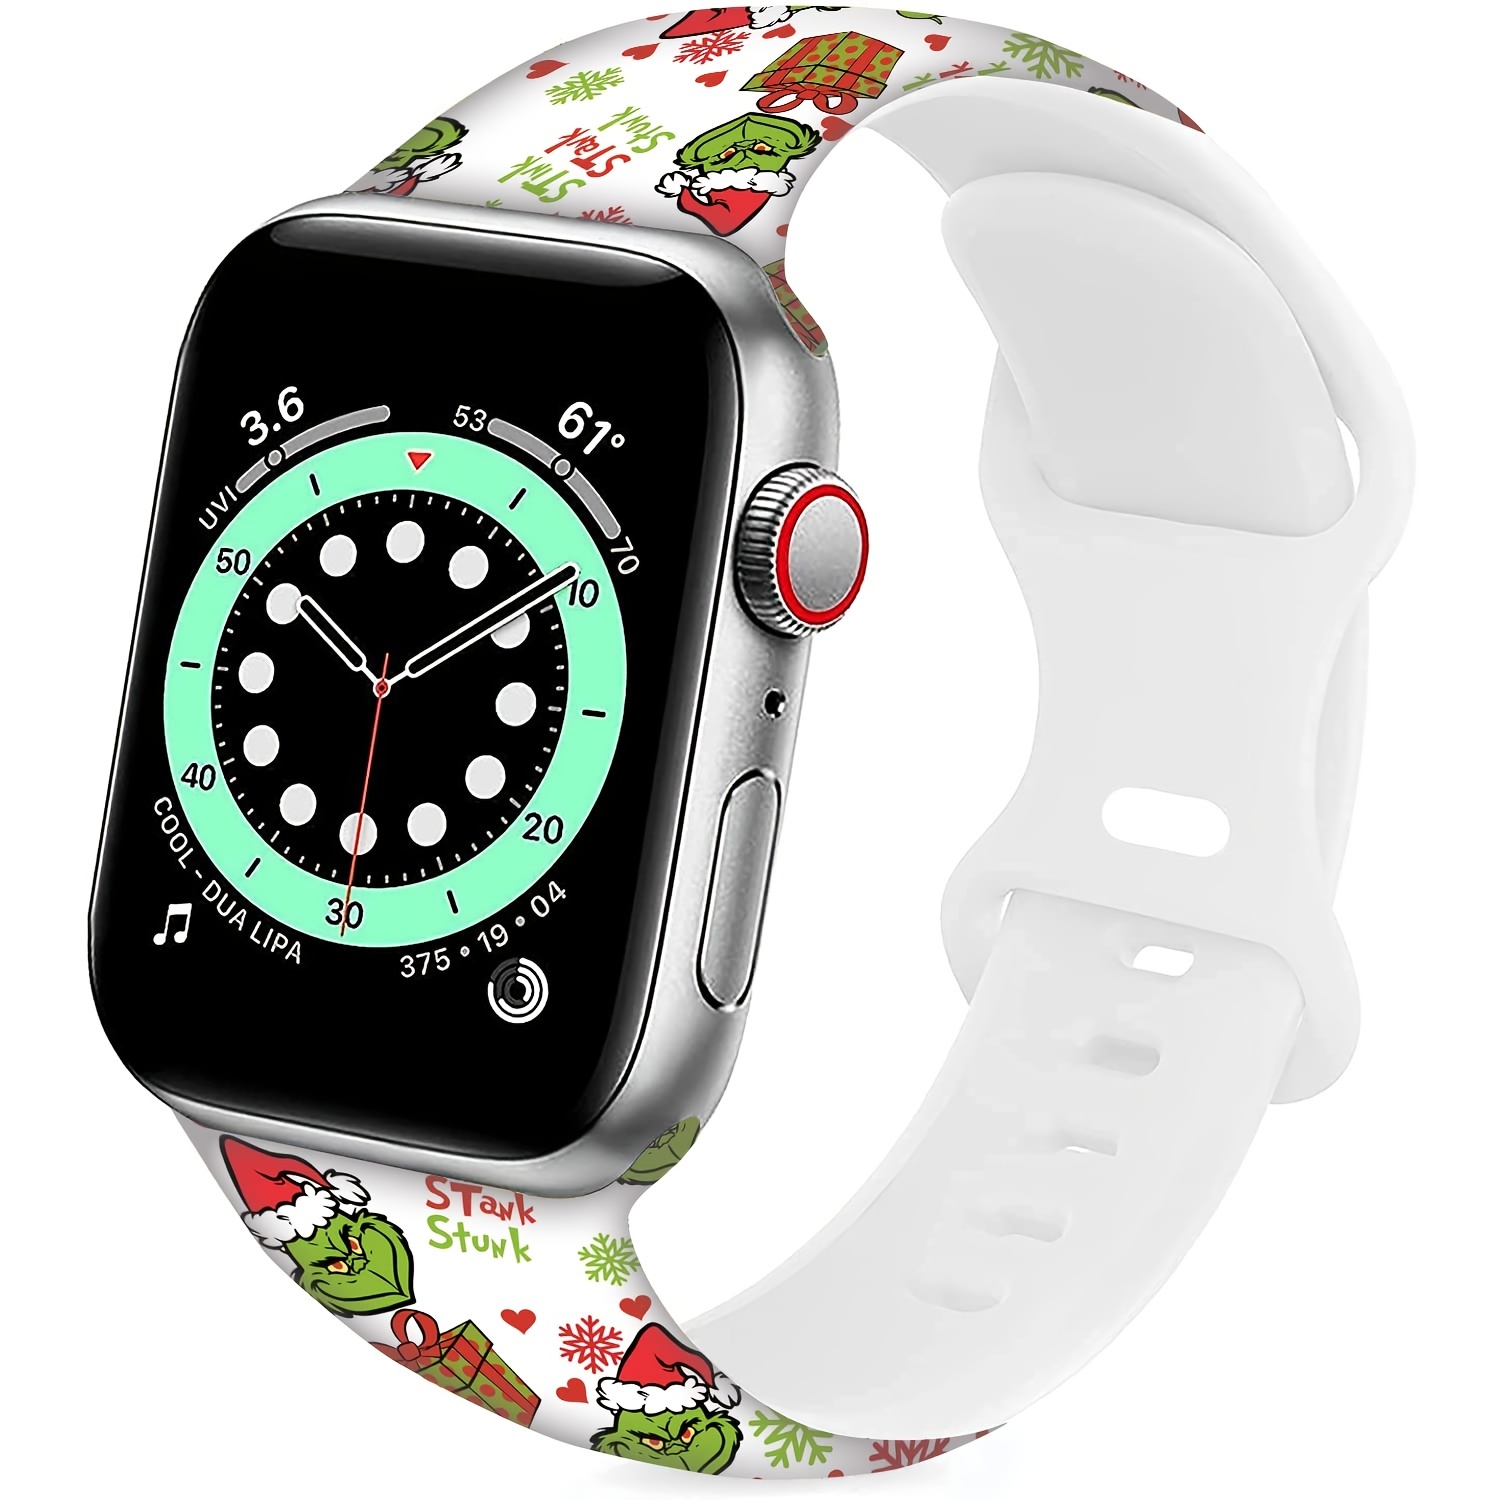  Cartoon Compatible with Apple Watch Band 38mm 40mm